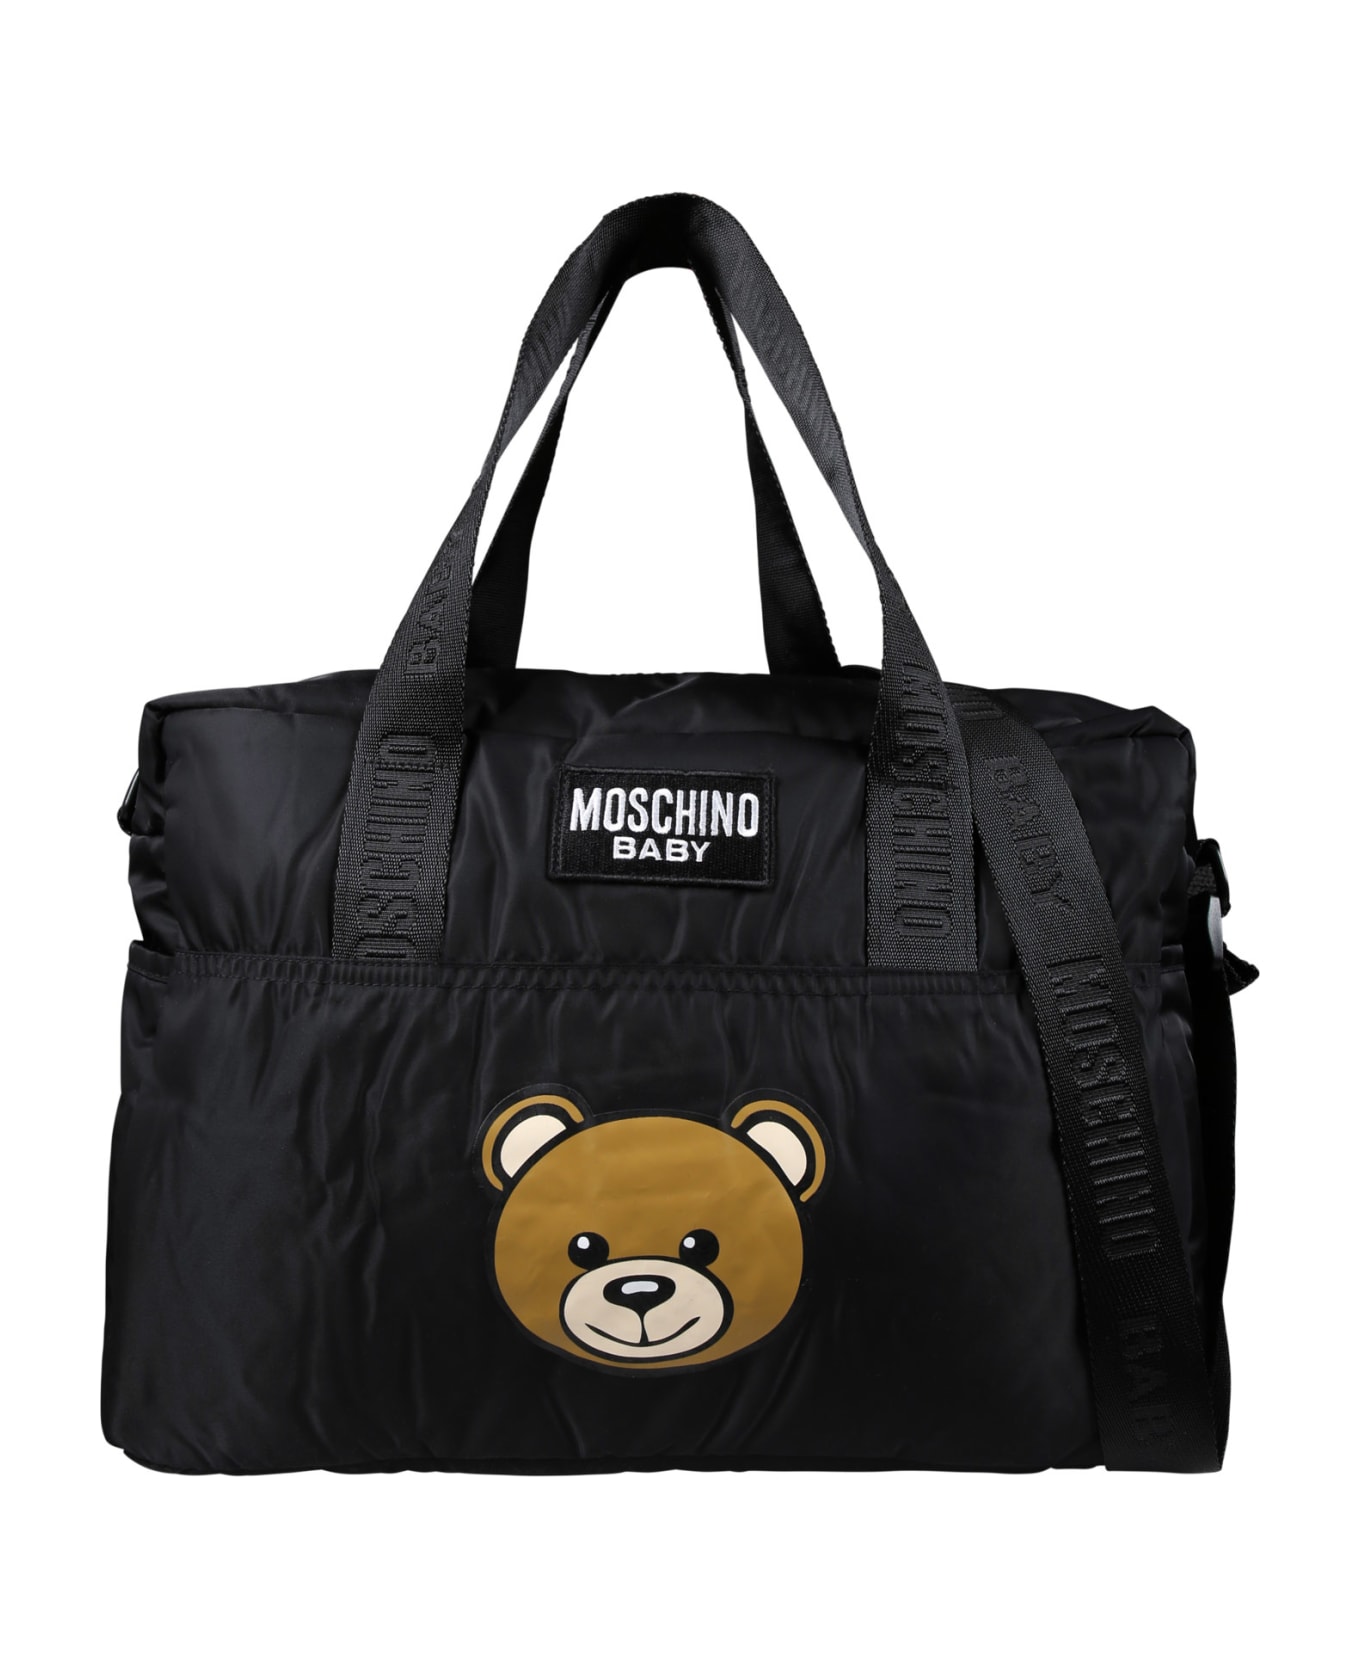 Moschino Black Mom Bag For Babies With Teddy Bear And Logo - Black アクセサリー＆ギフト